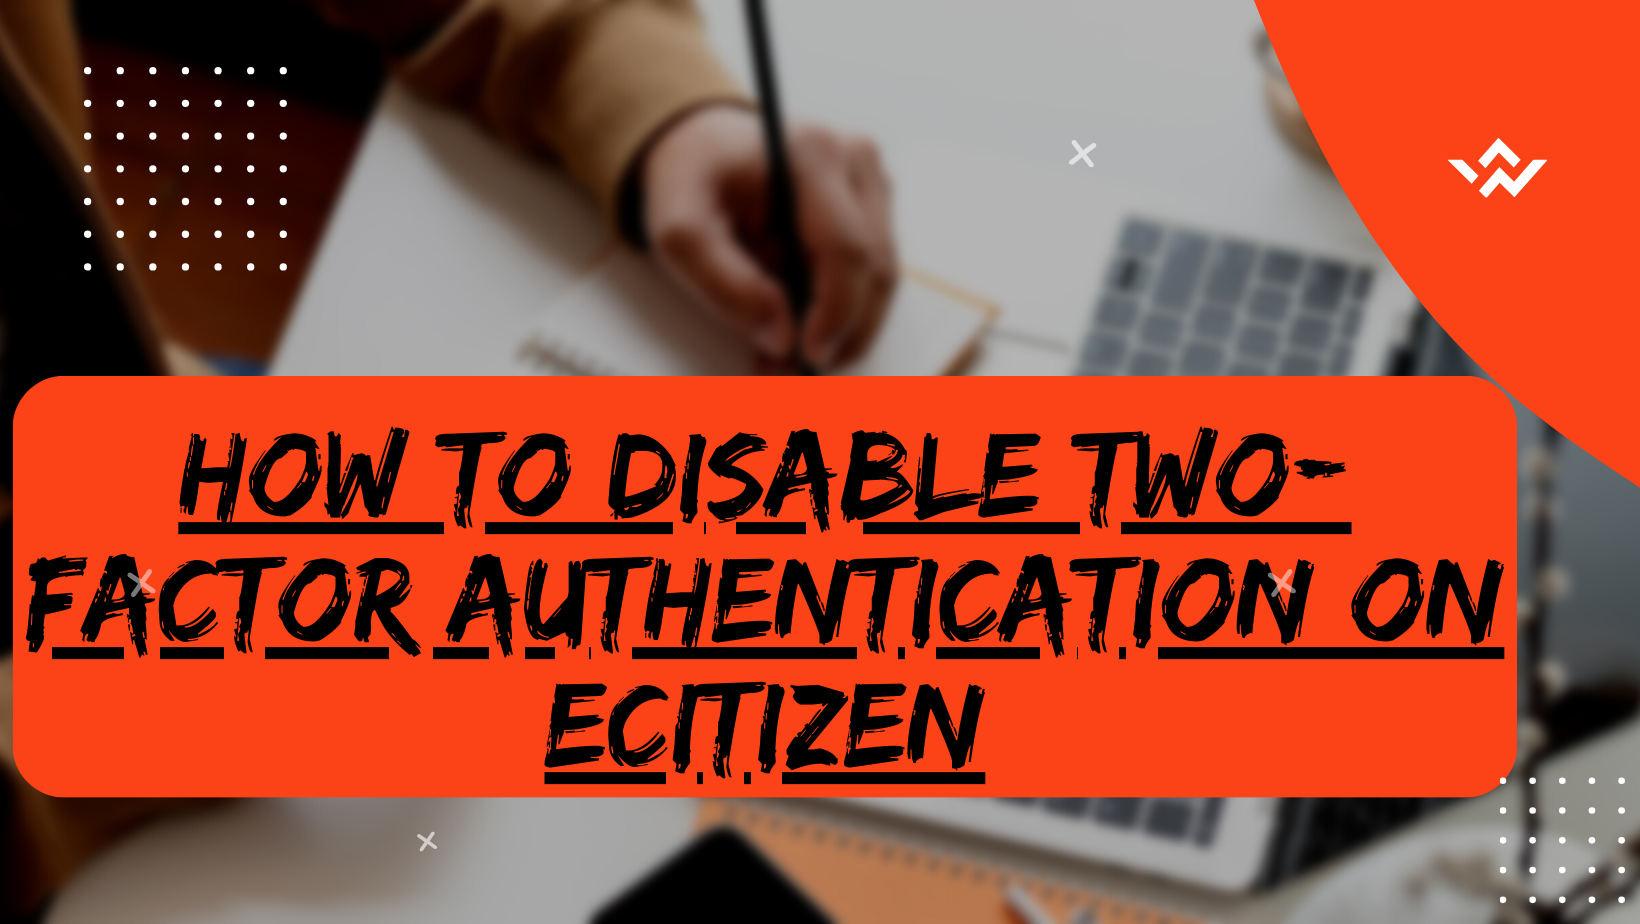 How To Disable Two Factor Authentication On eCitizen